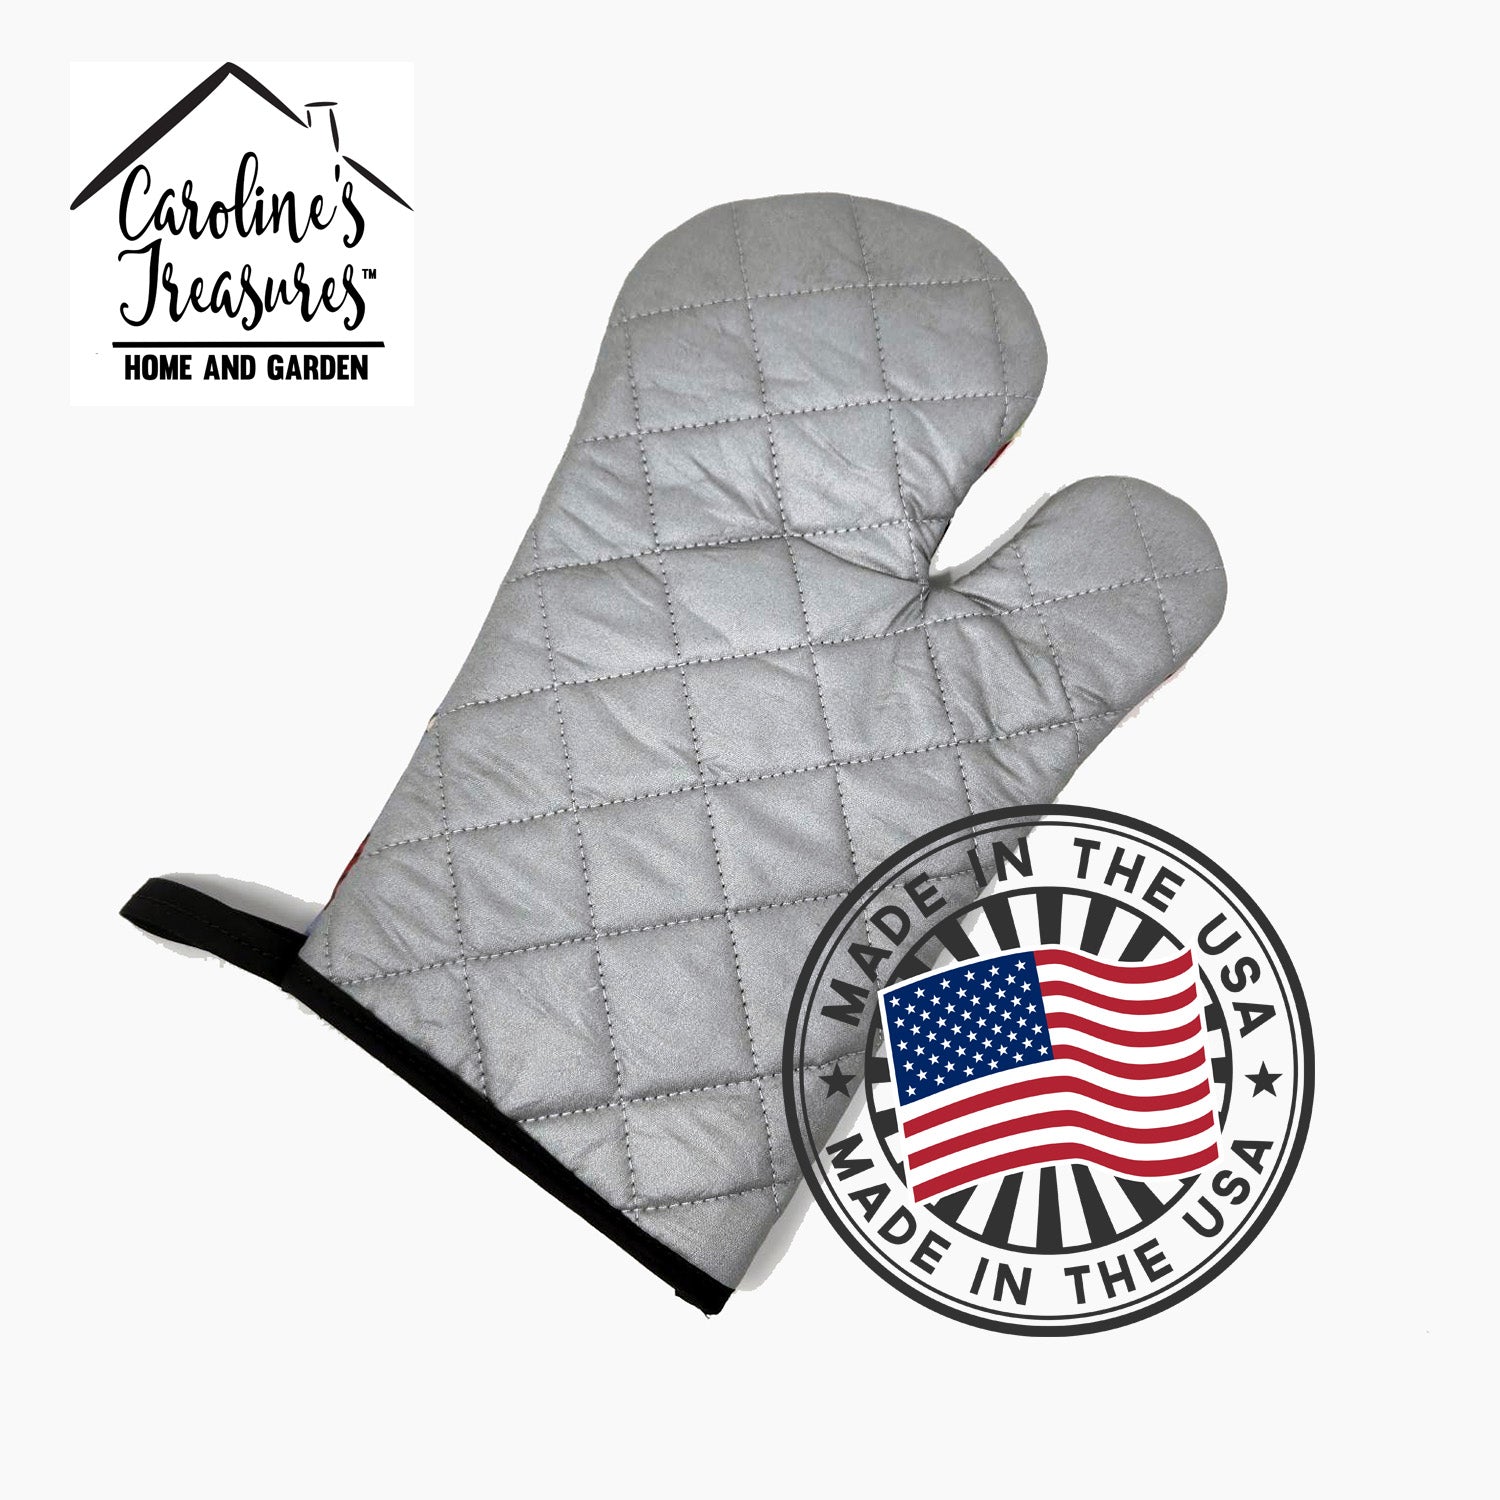 Lots of Tricolor Papillon Oven Mitt